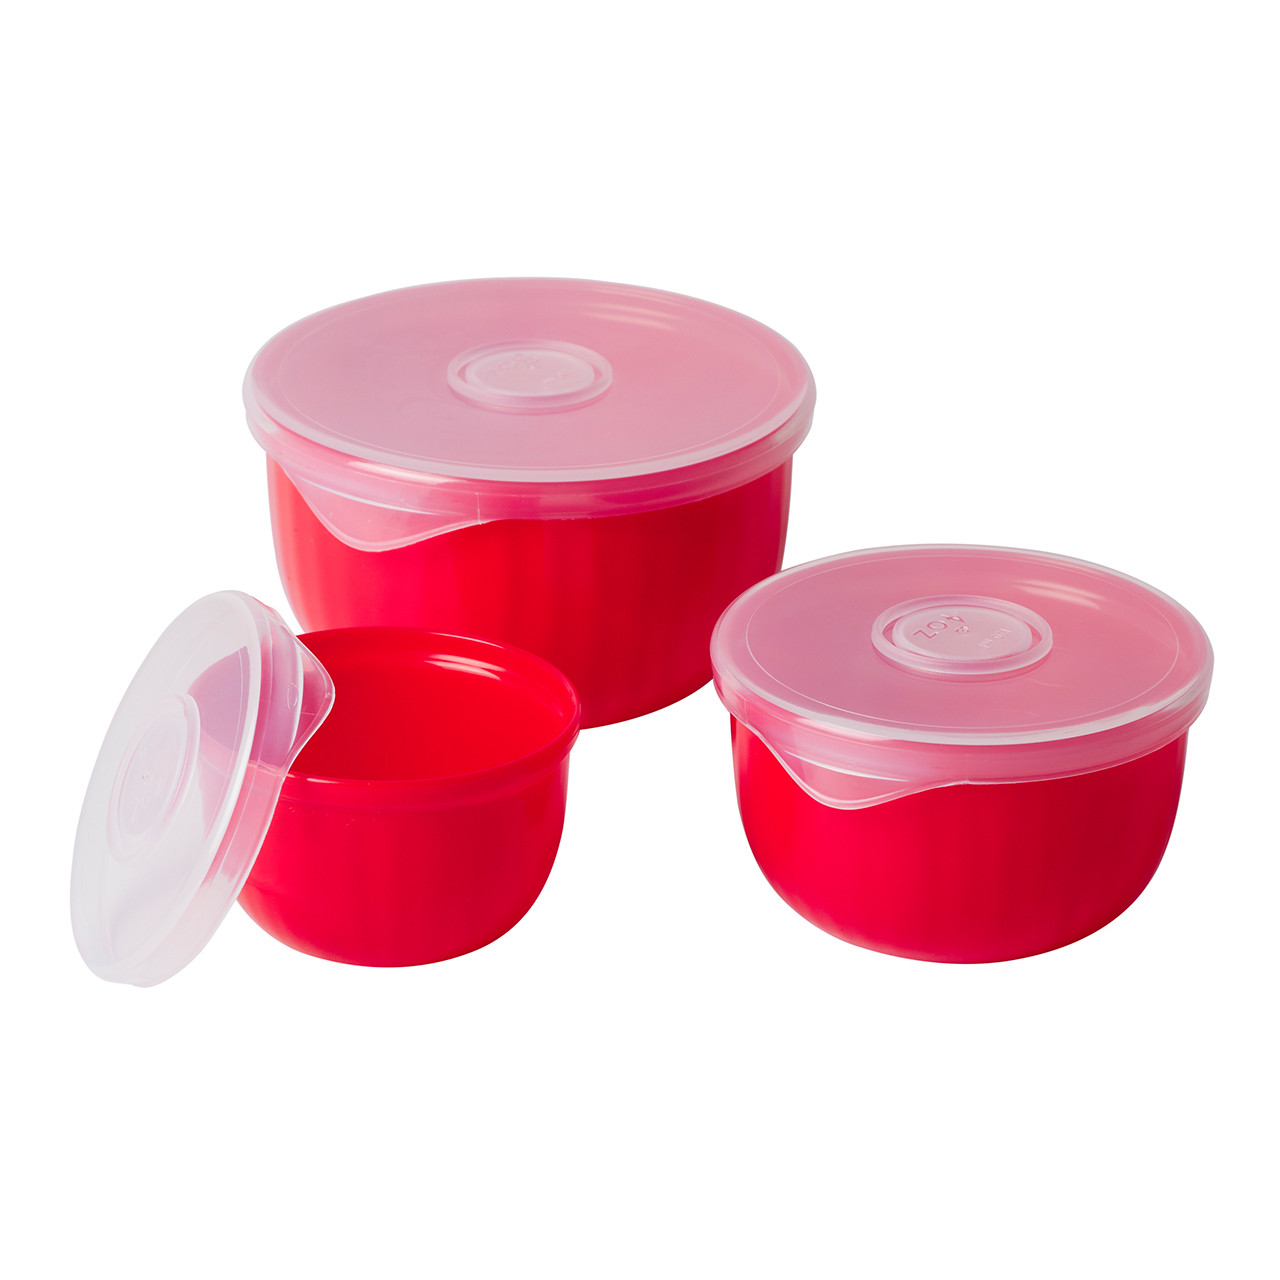 Hutzler 3-red Small Melamine Nesting Prep Bowls with Lids (2-Pack)